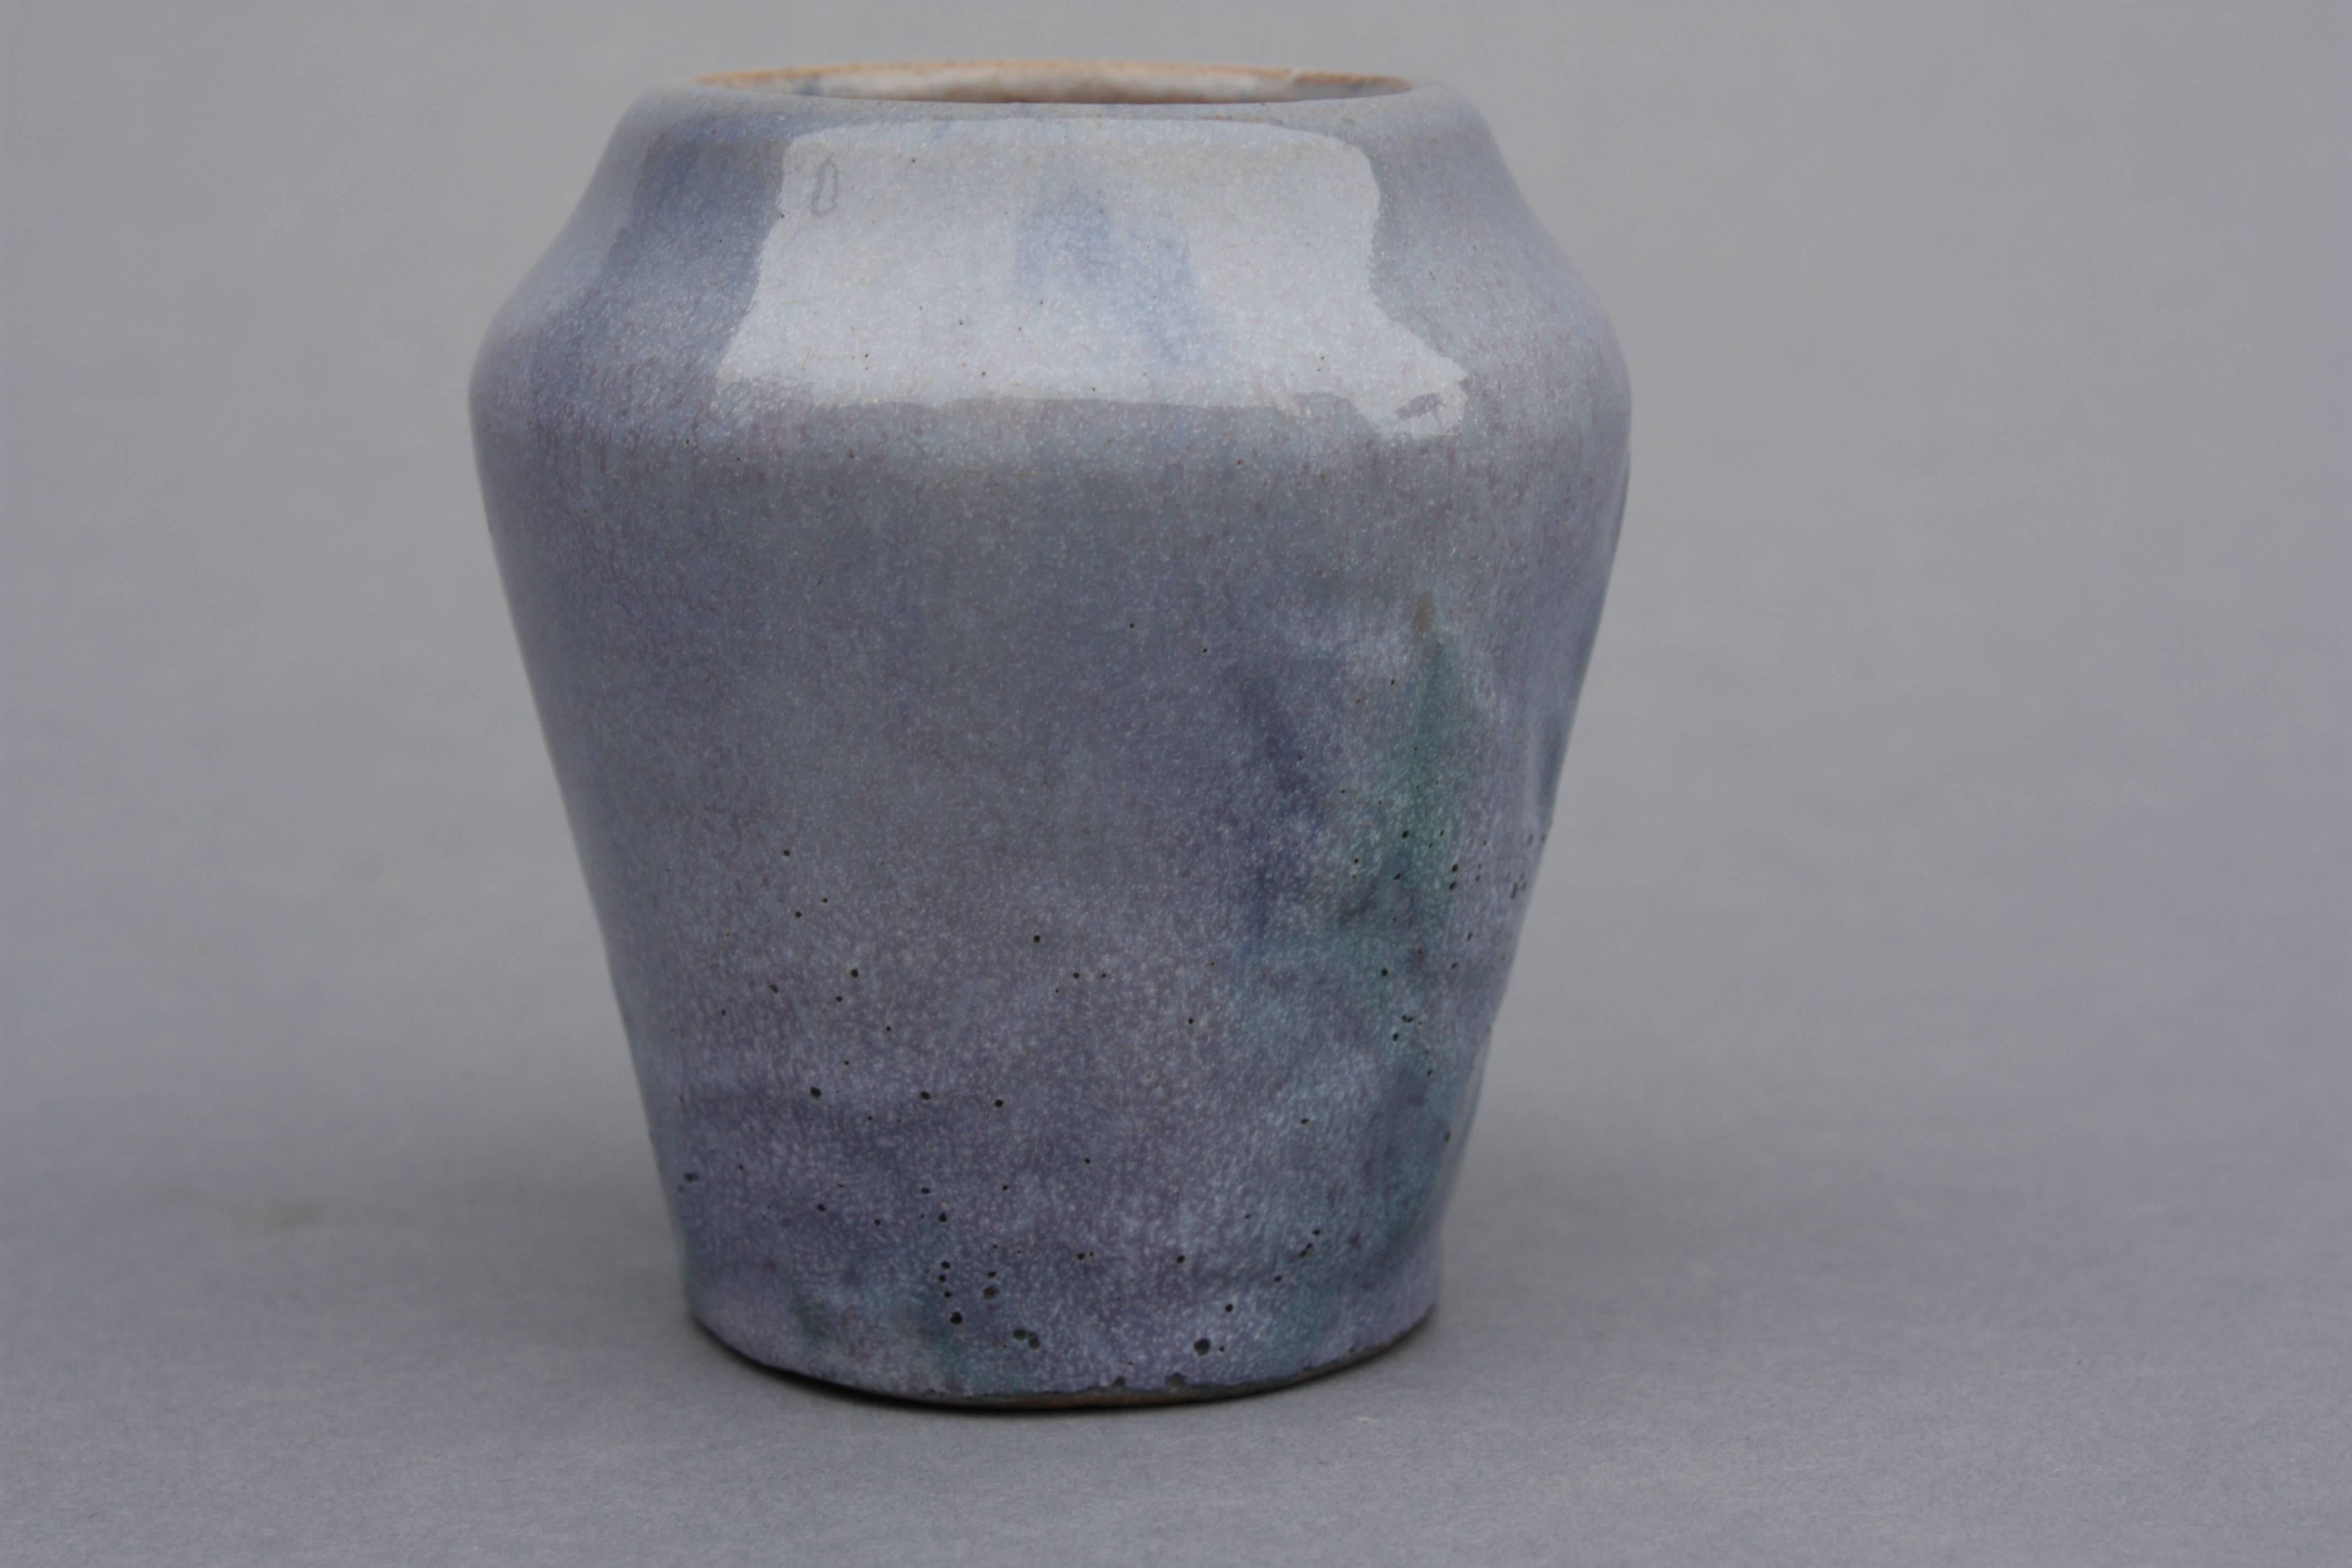 Arequipa vase with a hard to find raised leaf pattern and attractive blue glaze.